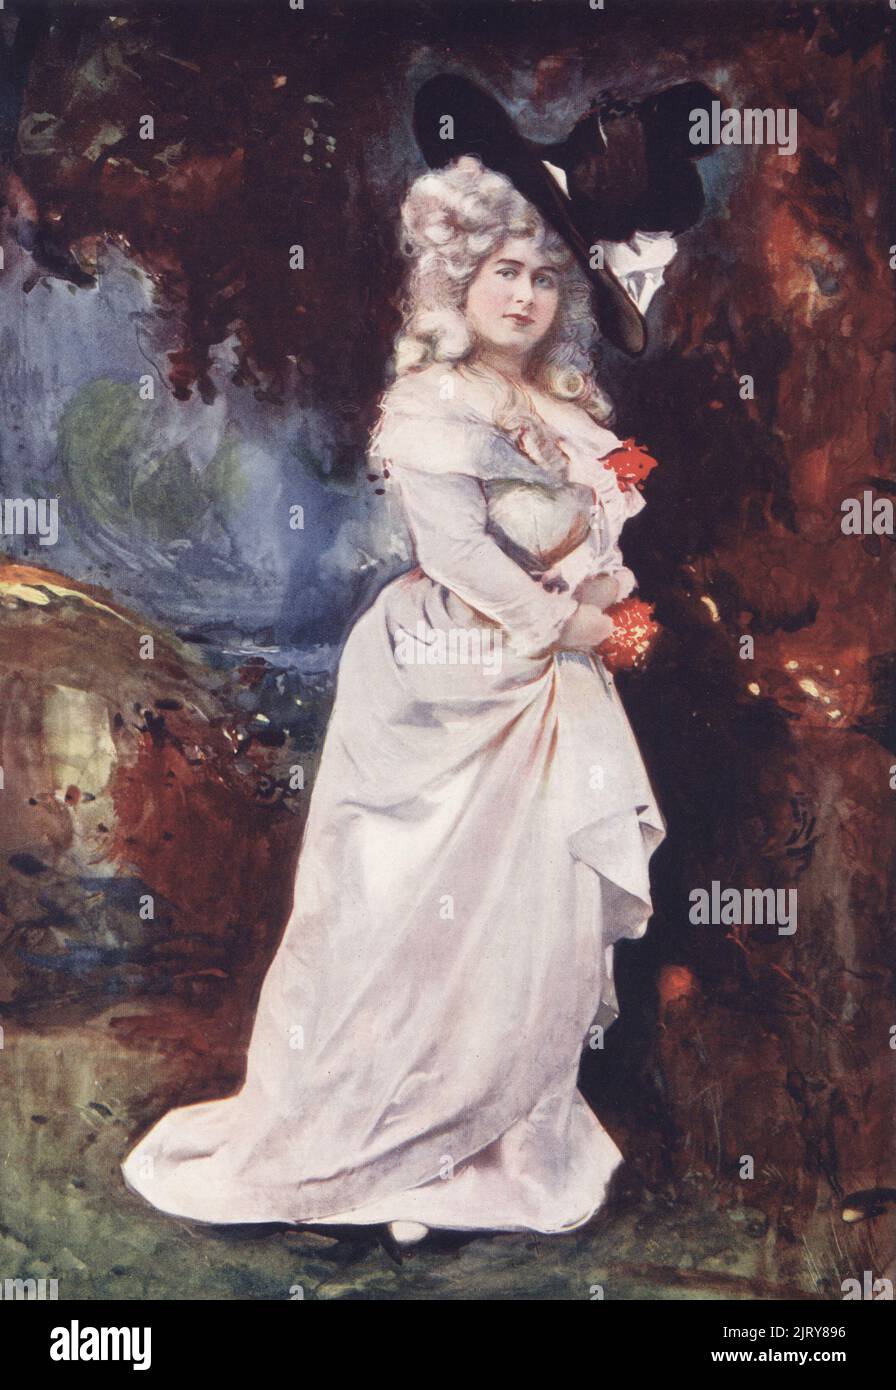 Miss Connie Ediss as Bella Jimper in The Silver Slipper, a musical by Owen Hall and Leslie Stuart at the Lyric, 1901 Ada Harriet Whitley, English actress and singer popular in Edwardian musical comedy, 1870-1934. Photograph by Alfred Ellis and Walery (Stanislaw Julian Ignacy). Colour printing of a hand-coloured illustration based on a monochrome photograph from George Newnes’s Players of the Day, London, 1905. Stock Photo